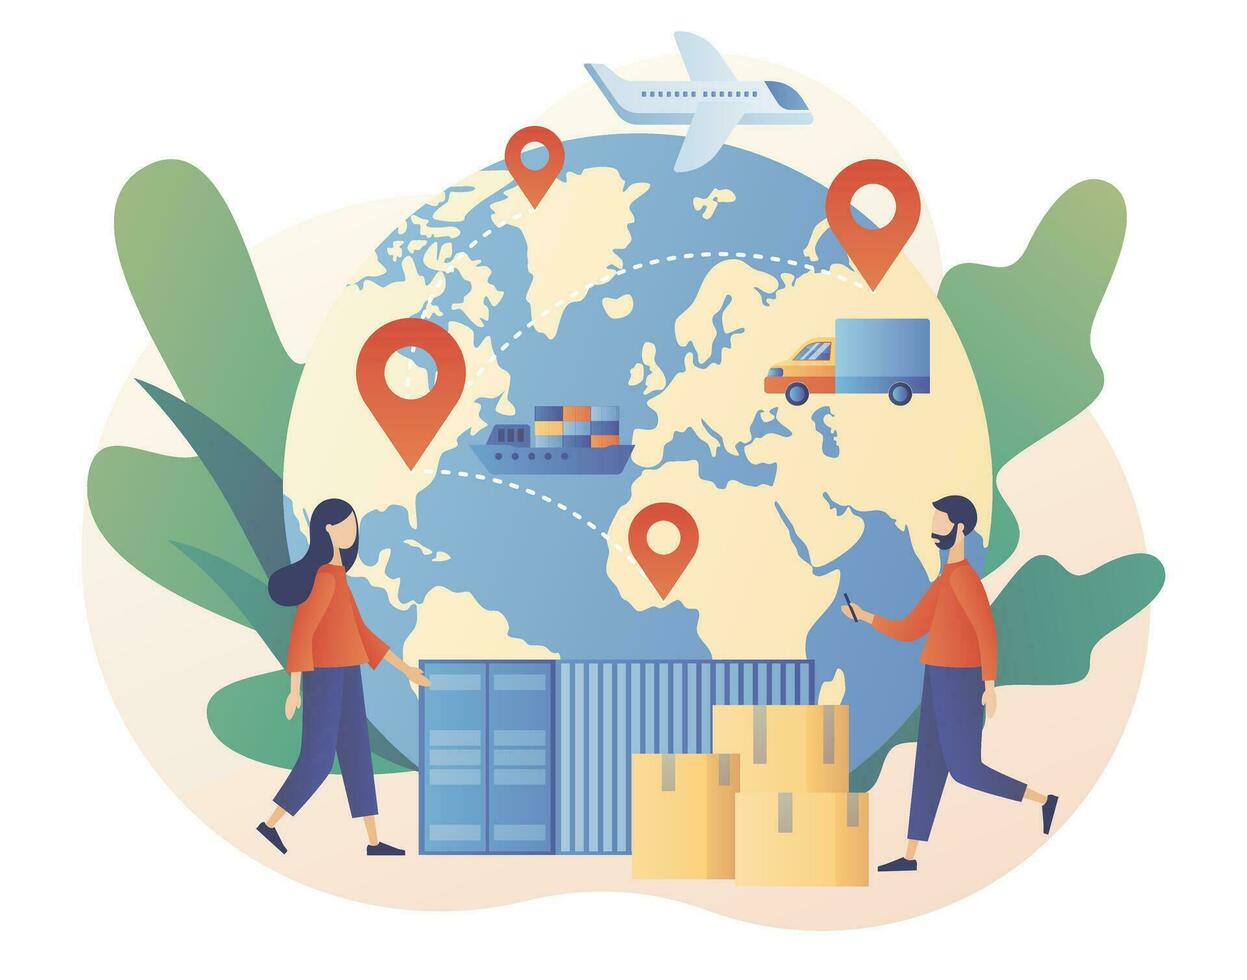 Business logistics. Global logistics network. Export, import, warehouse business, transportation. Air trucking, maritime shipping. On-time delivery. Modern flat cartoon style. Vector illustration